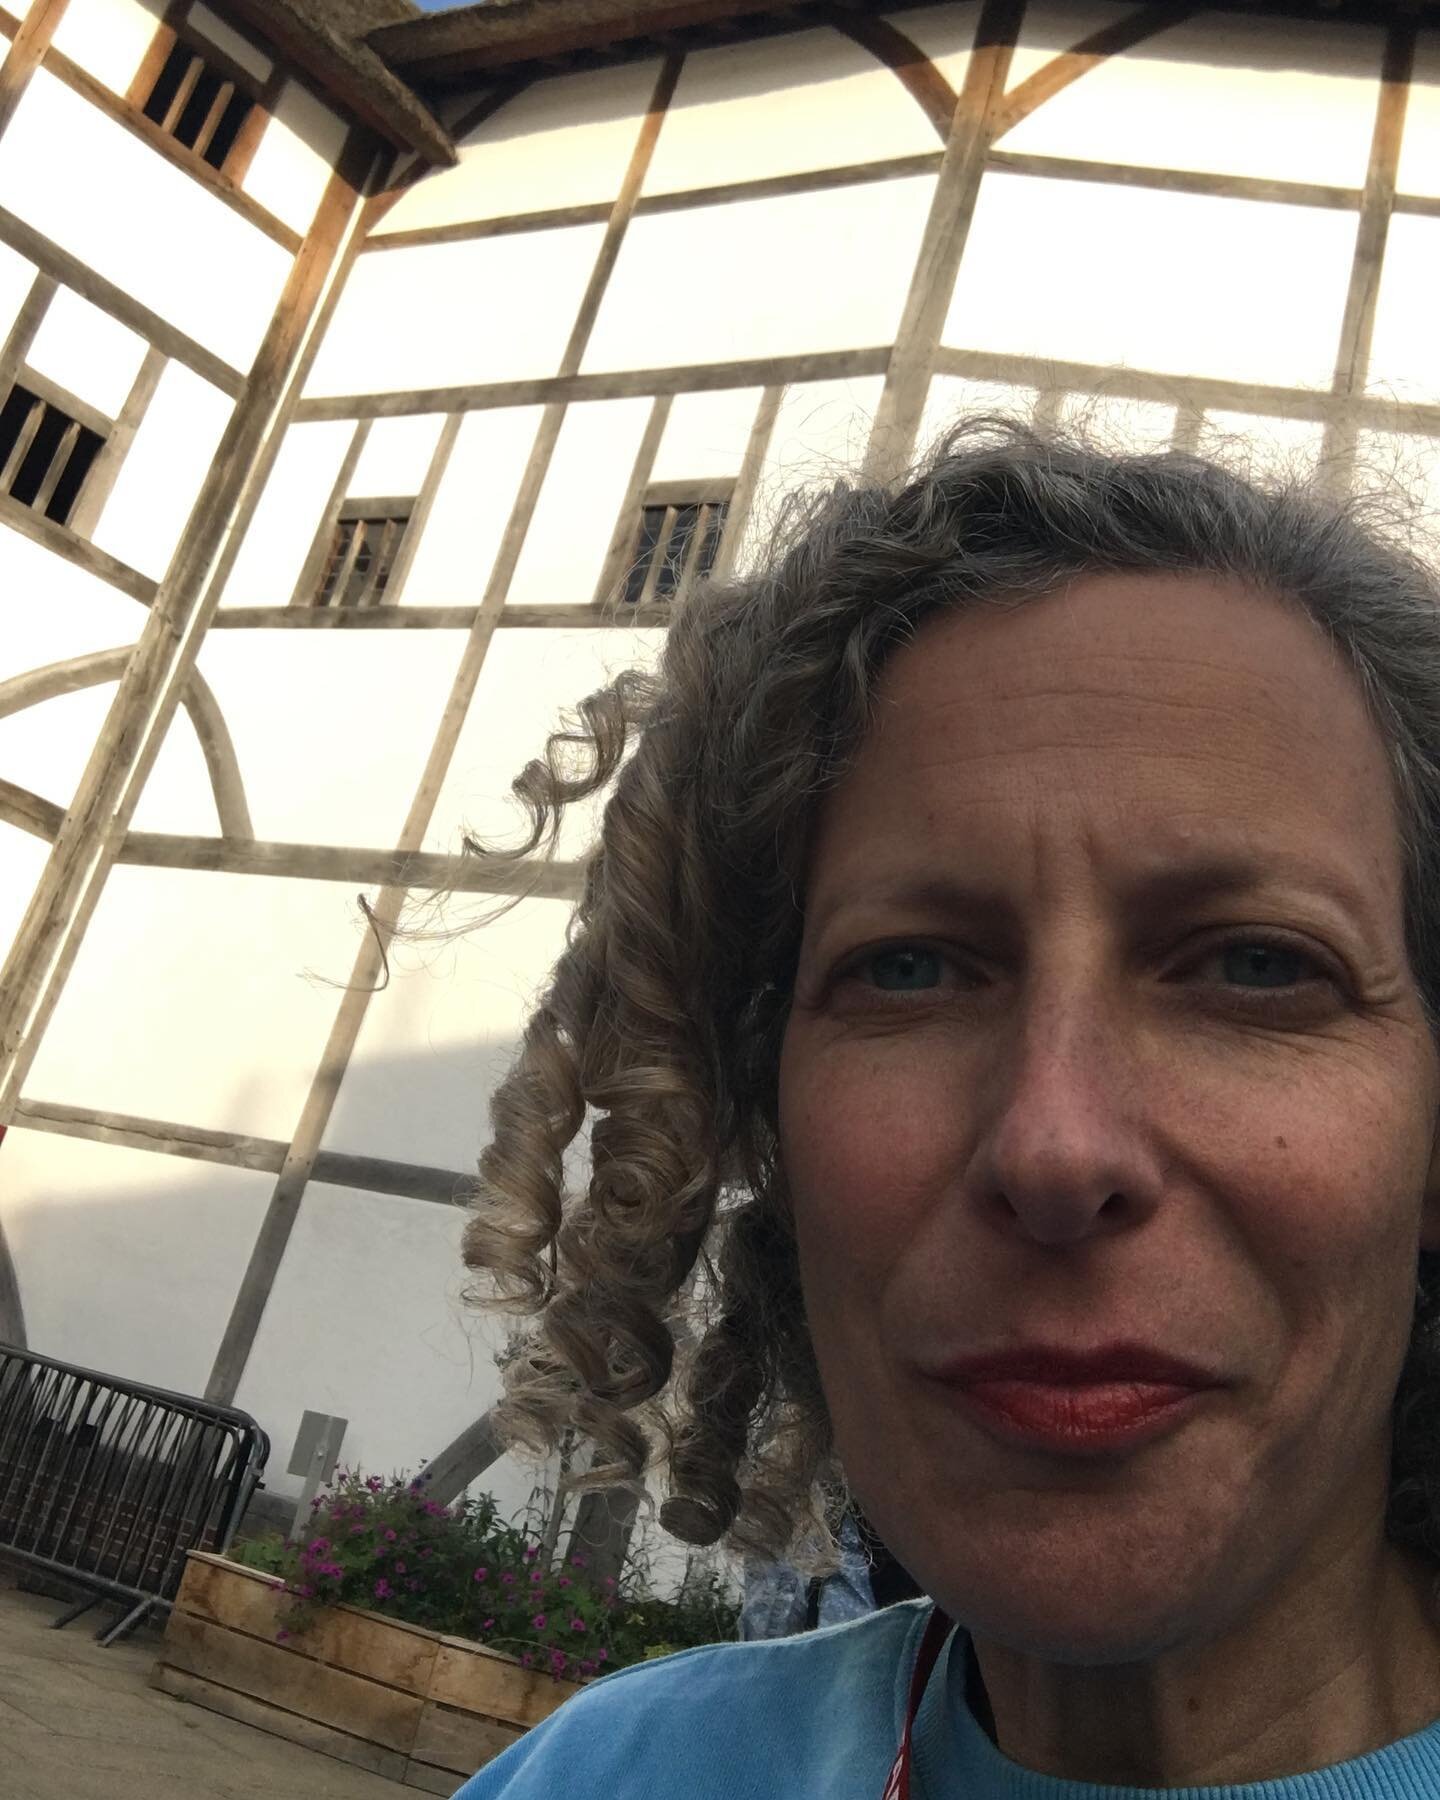 We&rsquo;ve lent #osnatschmool to a rather special theatre. Here&rsquo;s what she looks like just before first preview 🤪 with some creative team chums&hellip;watch this space @the_globe #herewego